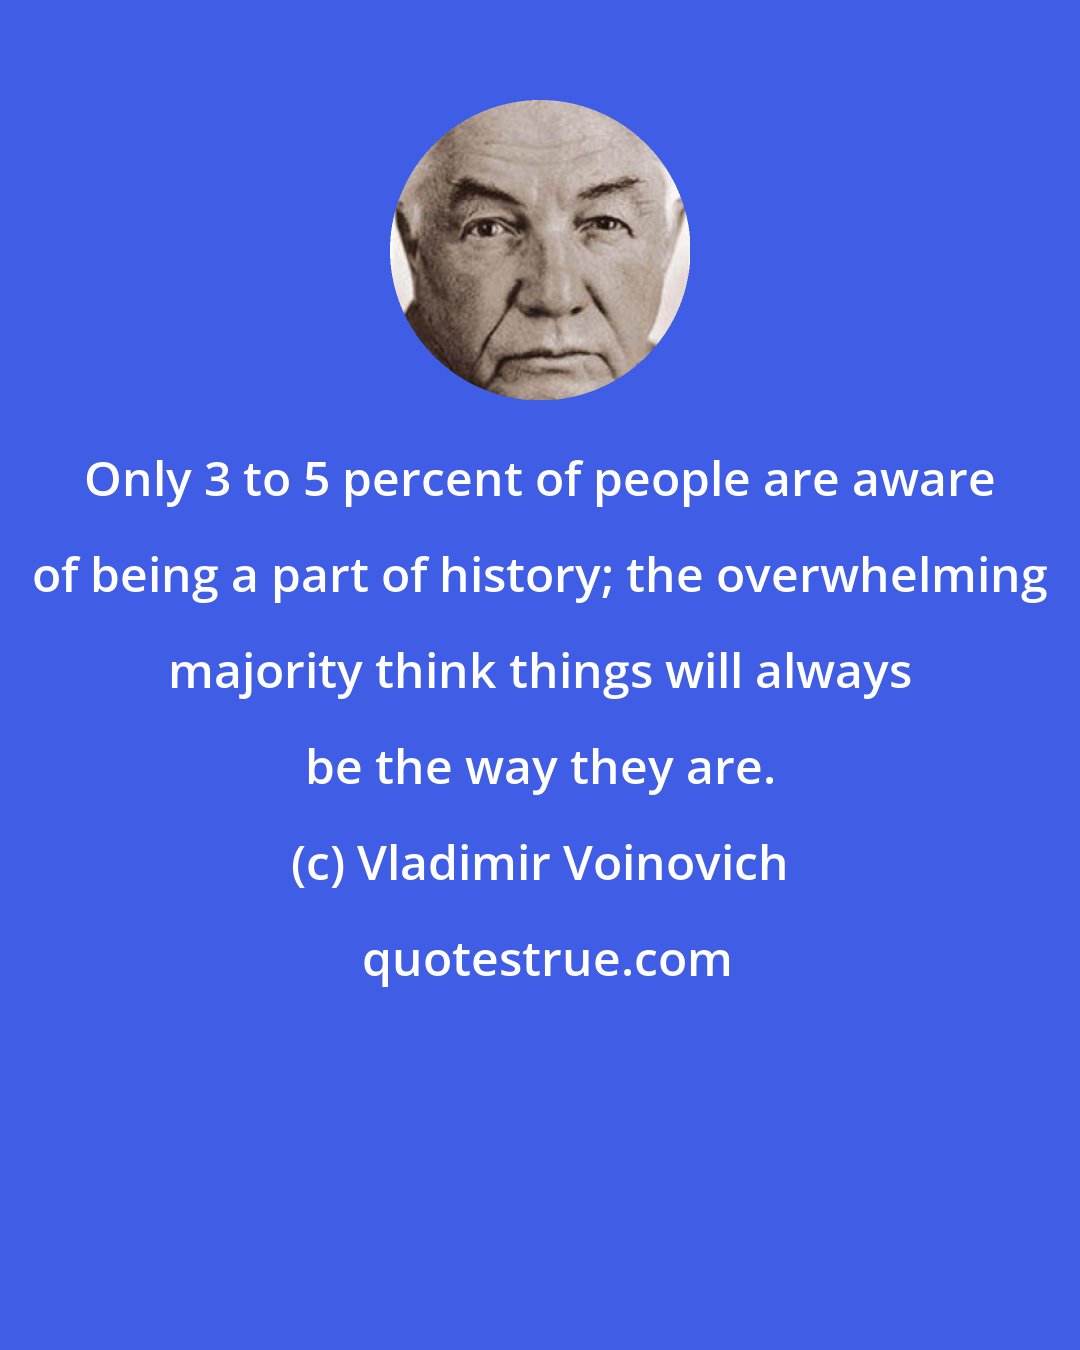 Vladimir Voinovich: Only 3 to 5 percent of people are aware of being a part of history; the overwhelming majority think things will always be the way they are.